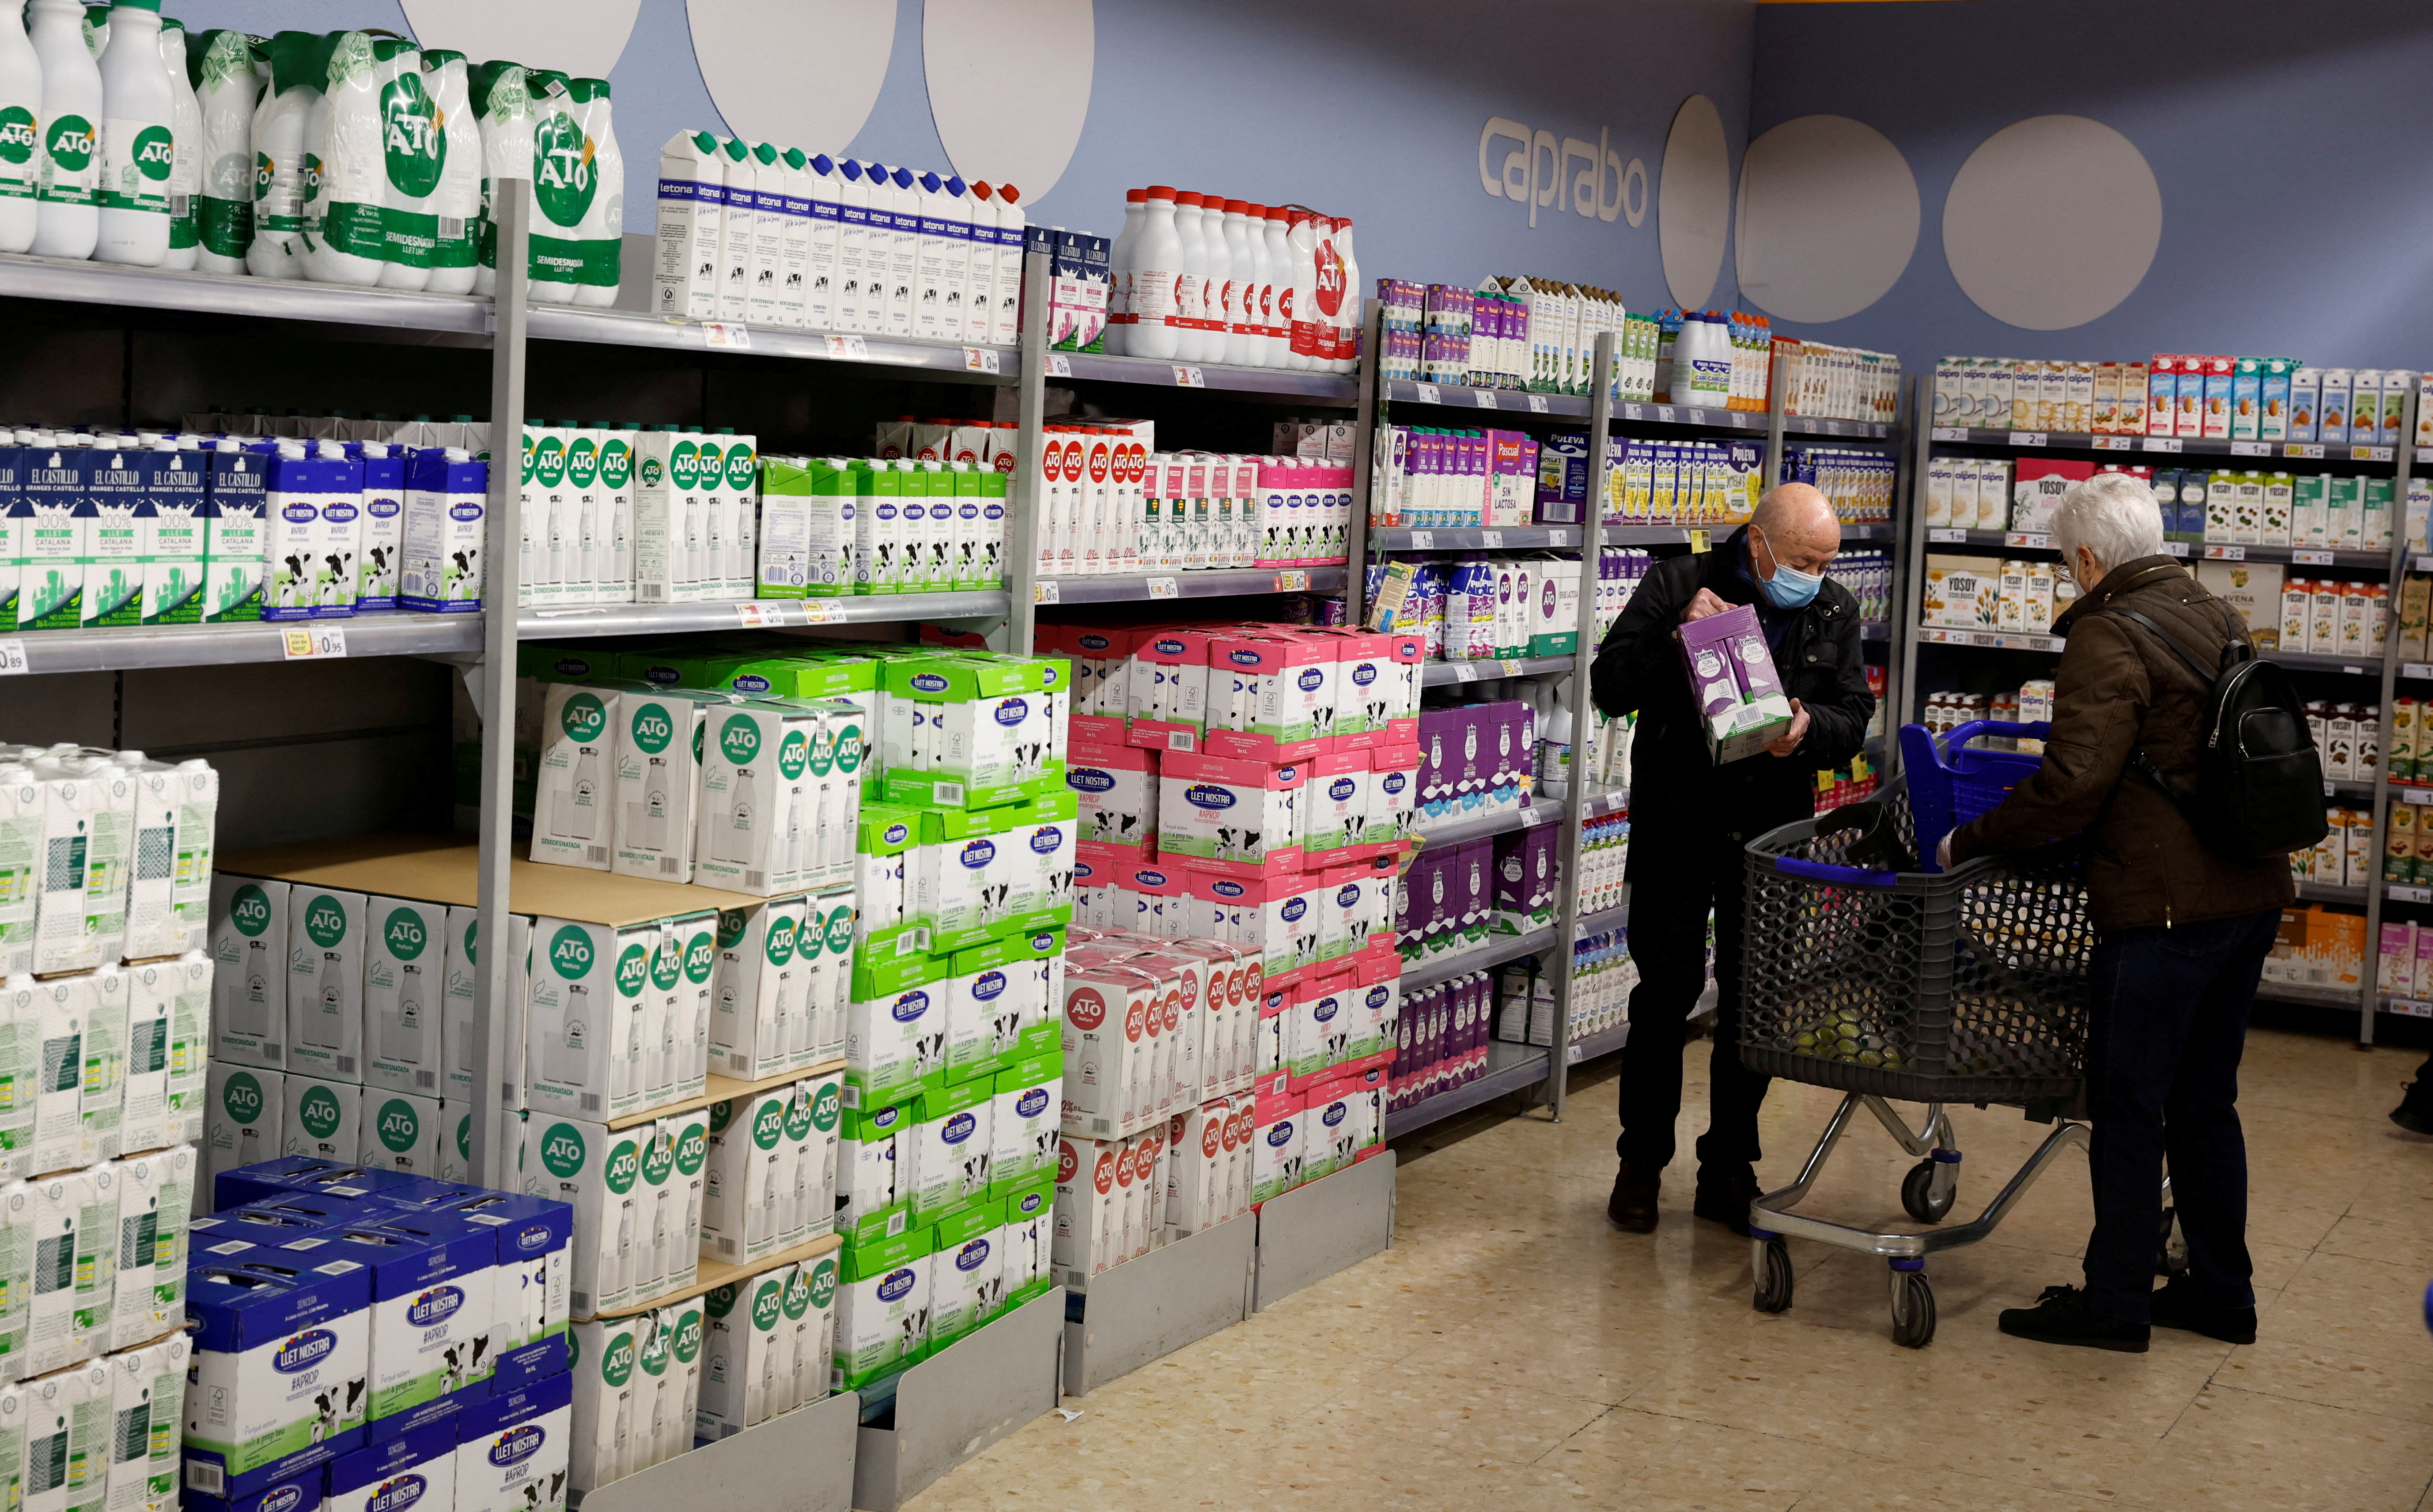 A couple takes some milk in a Caprabo supermarket in Barcelona